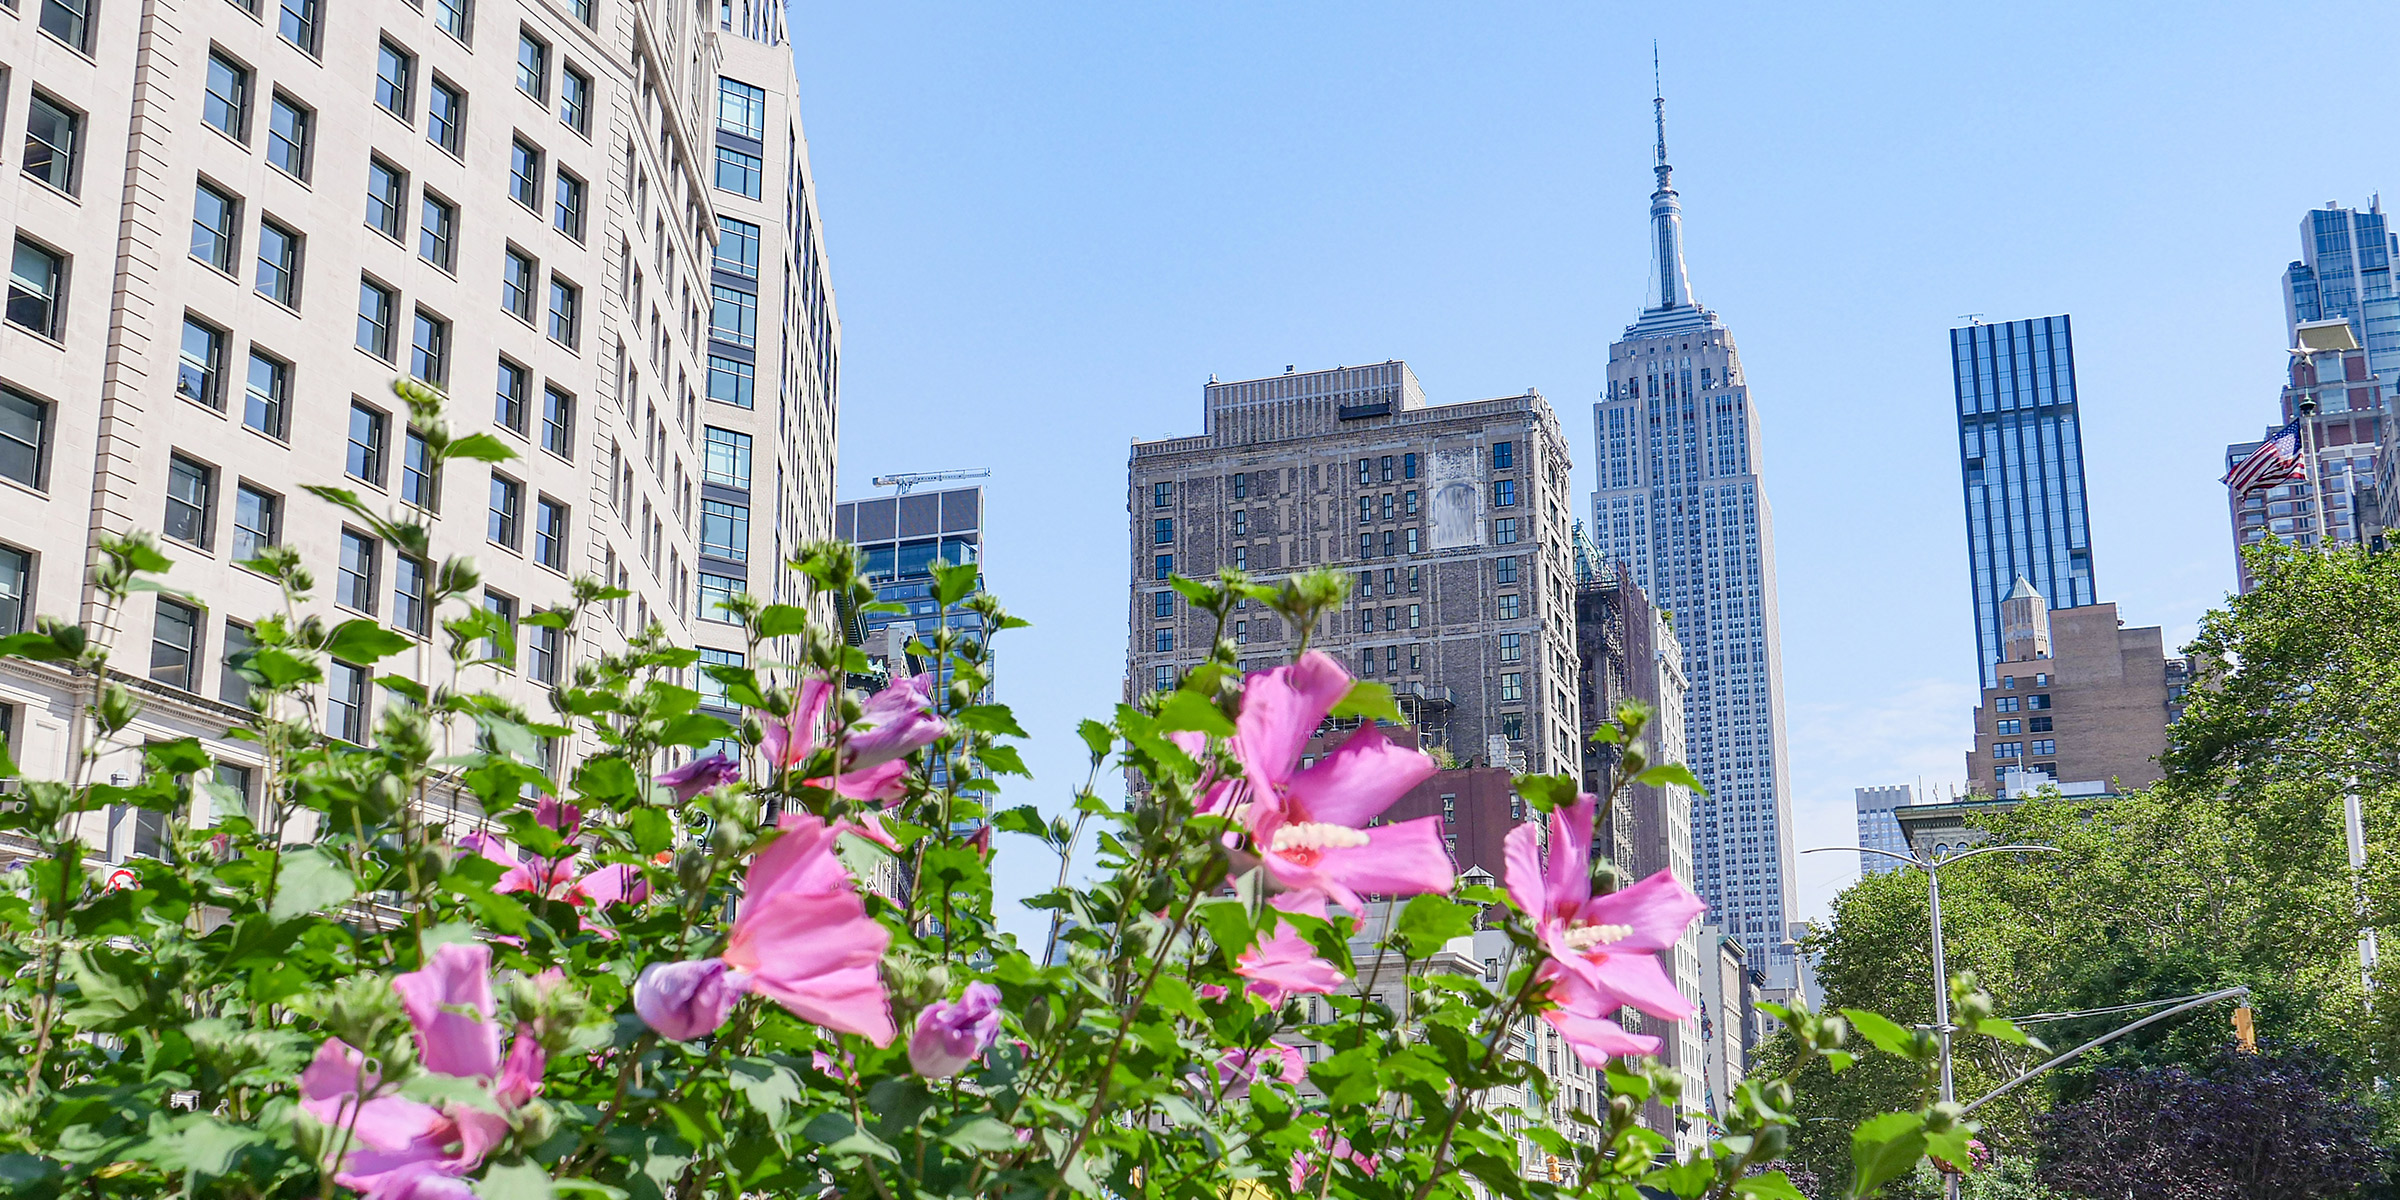 Empire State Building View in front of flowered bush